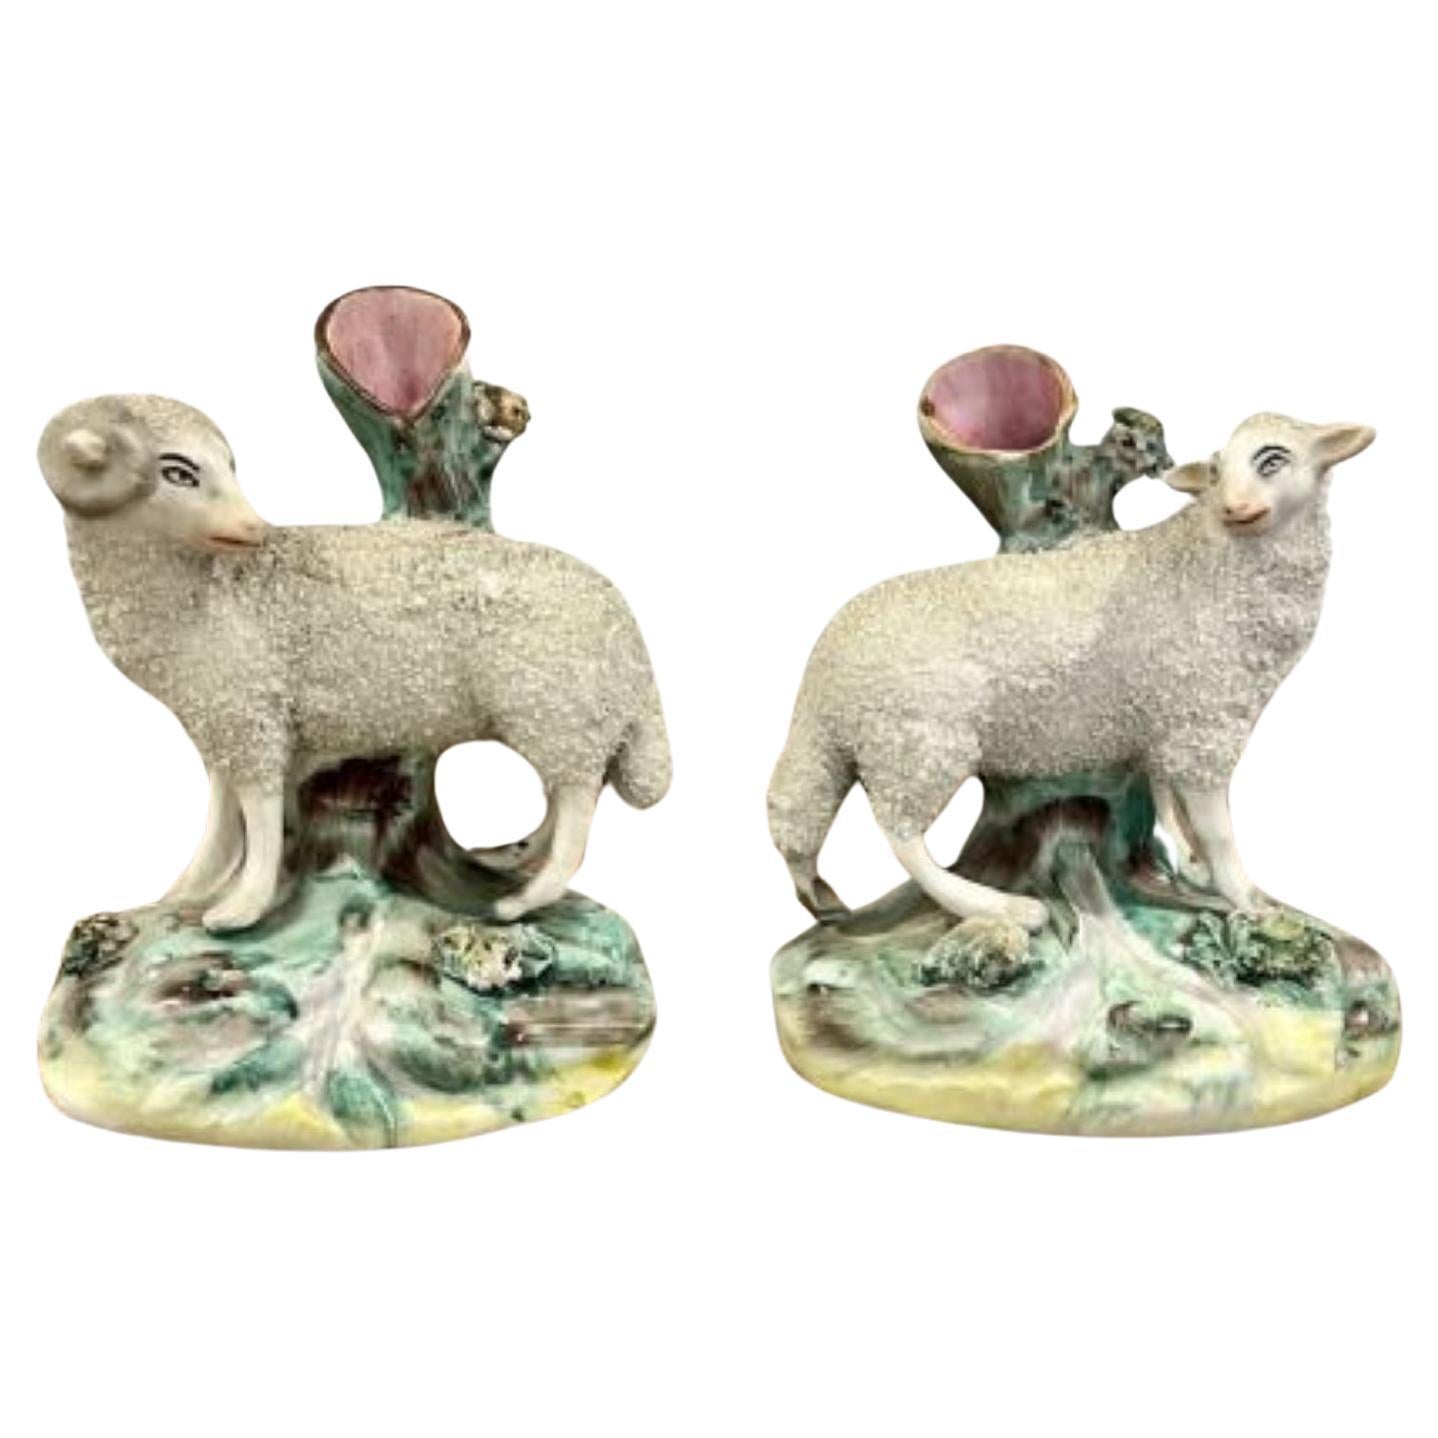 Pair of antique Victorian quality Staffordshire lambs